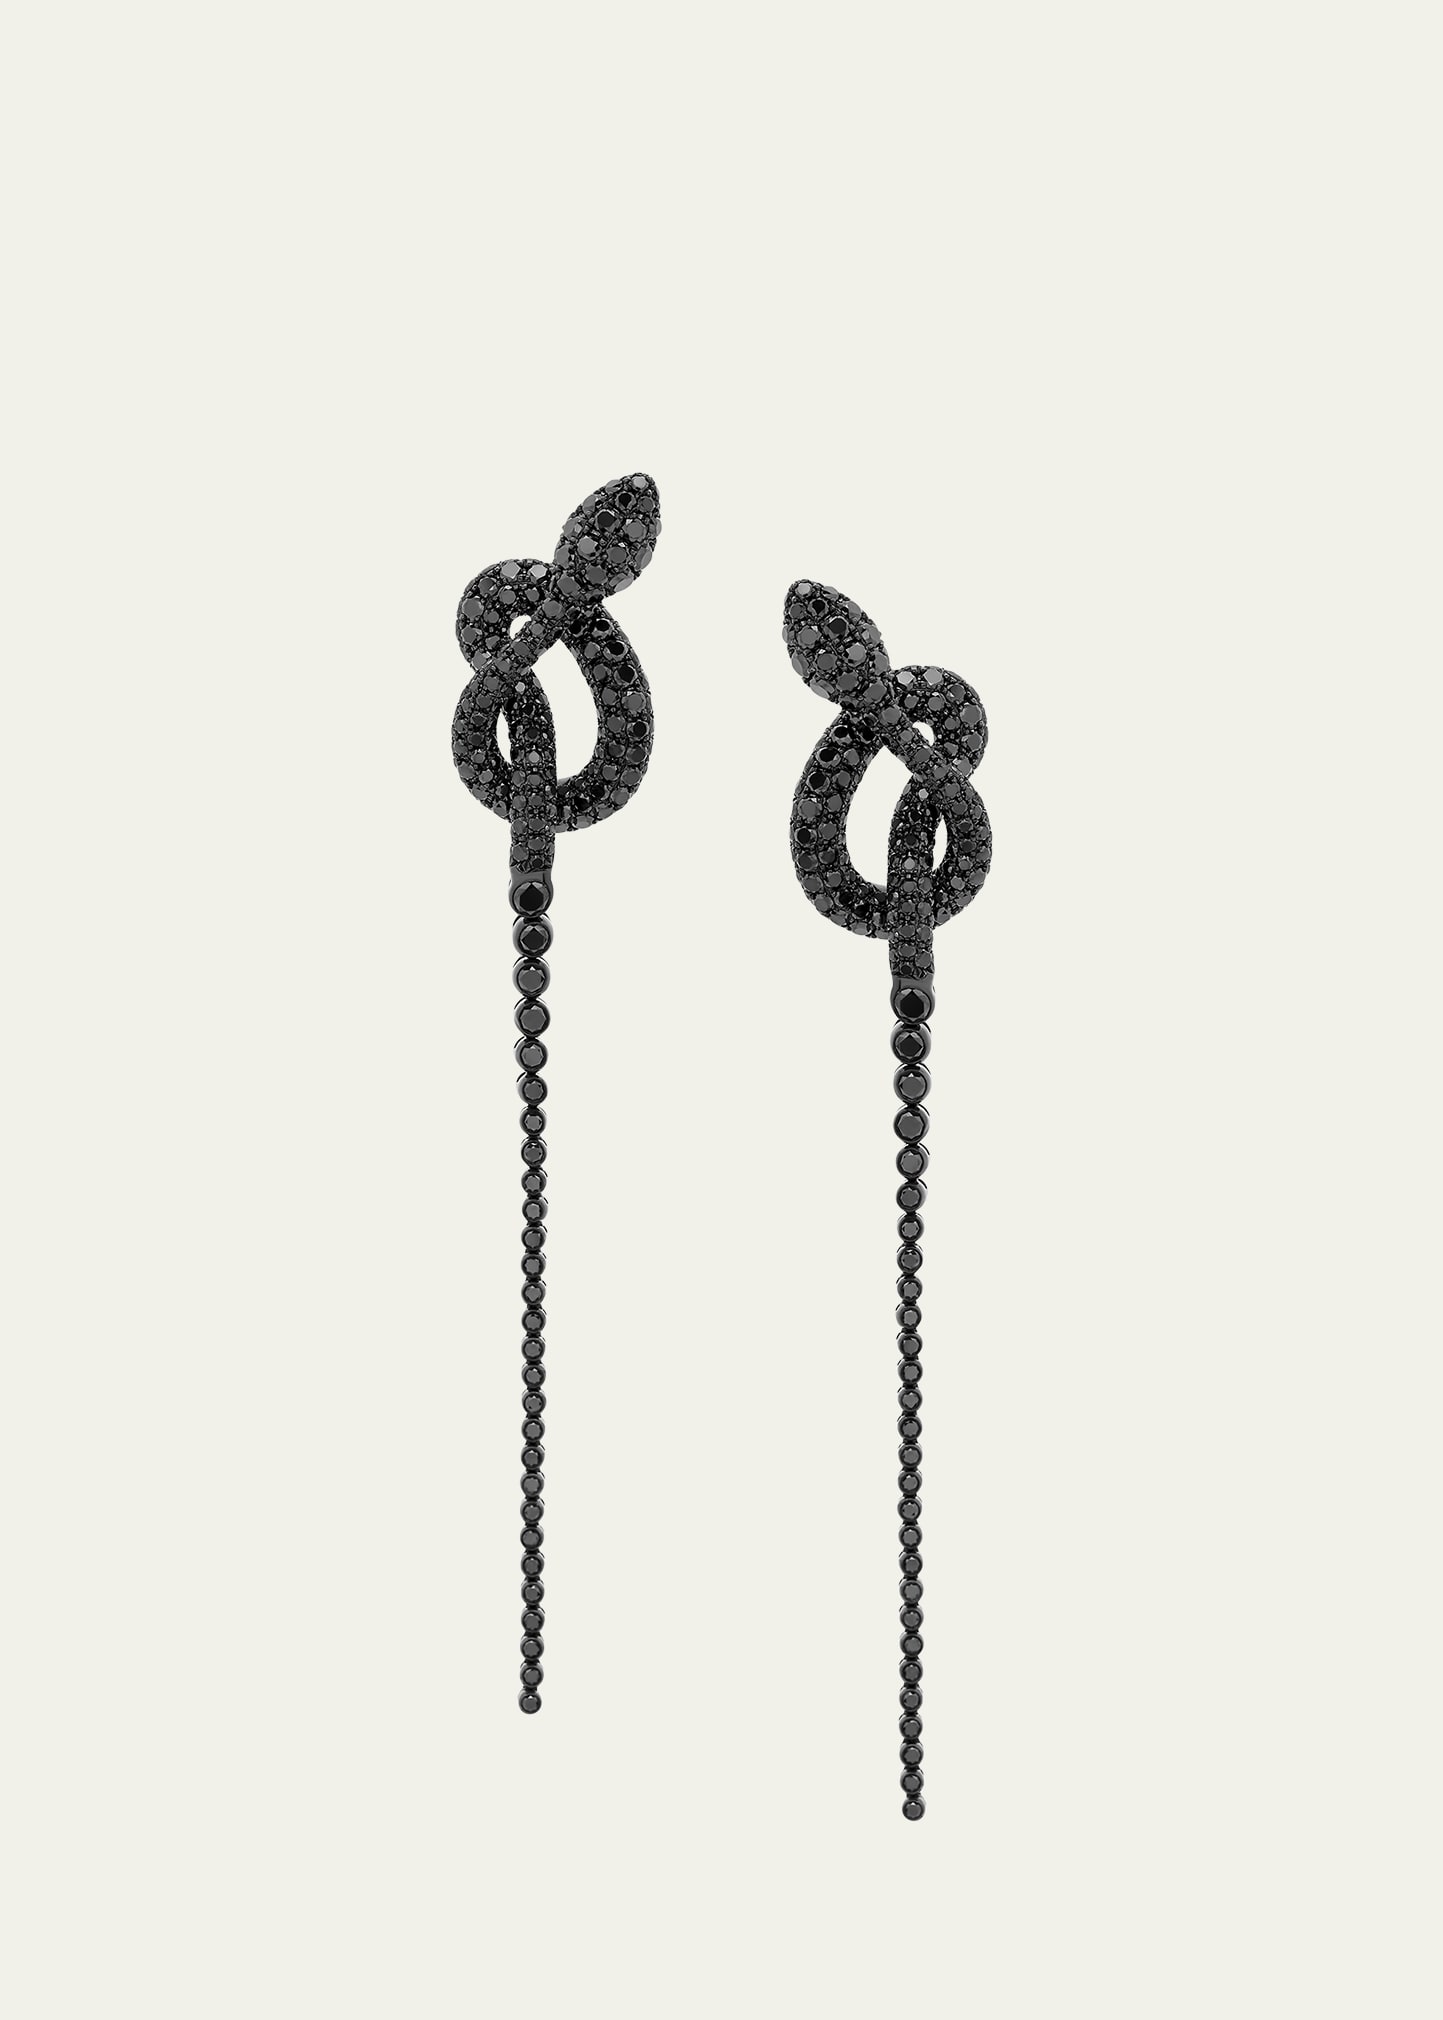 Stéfère White Gold Black Diamond Earrings From The Snake Collection